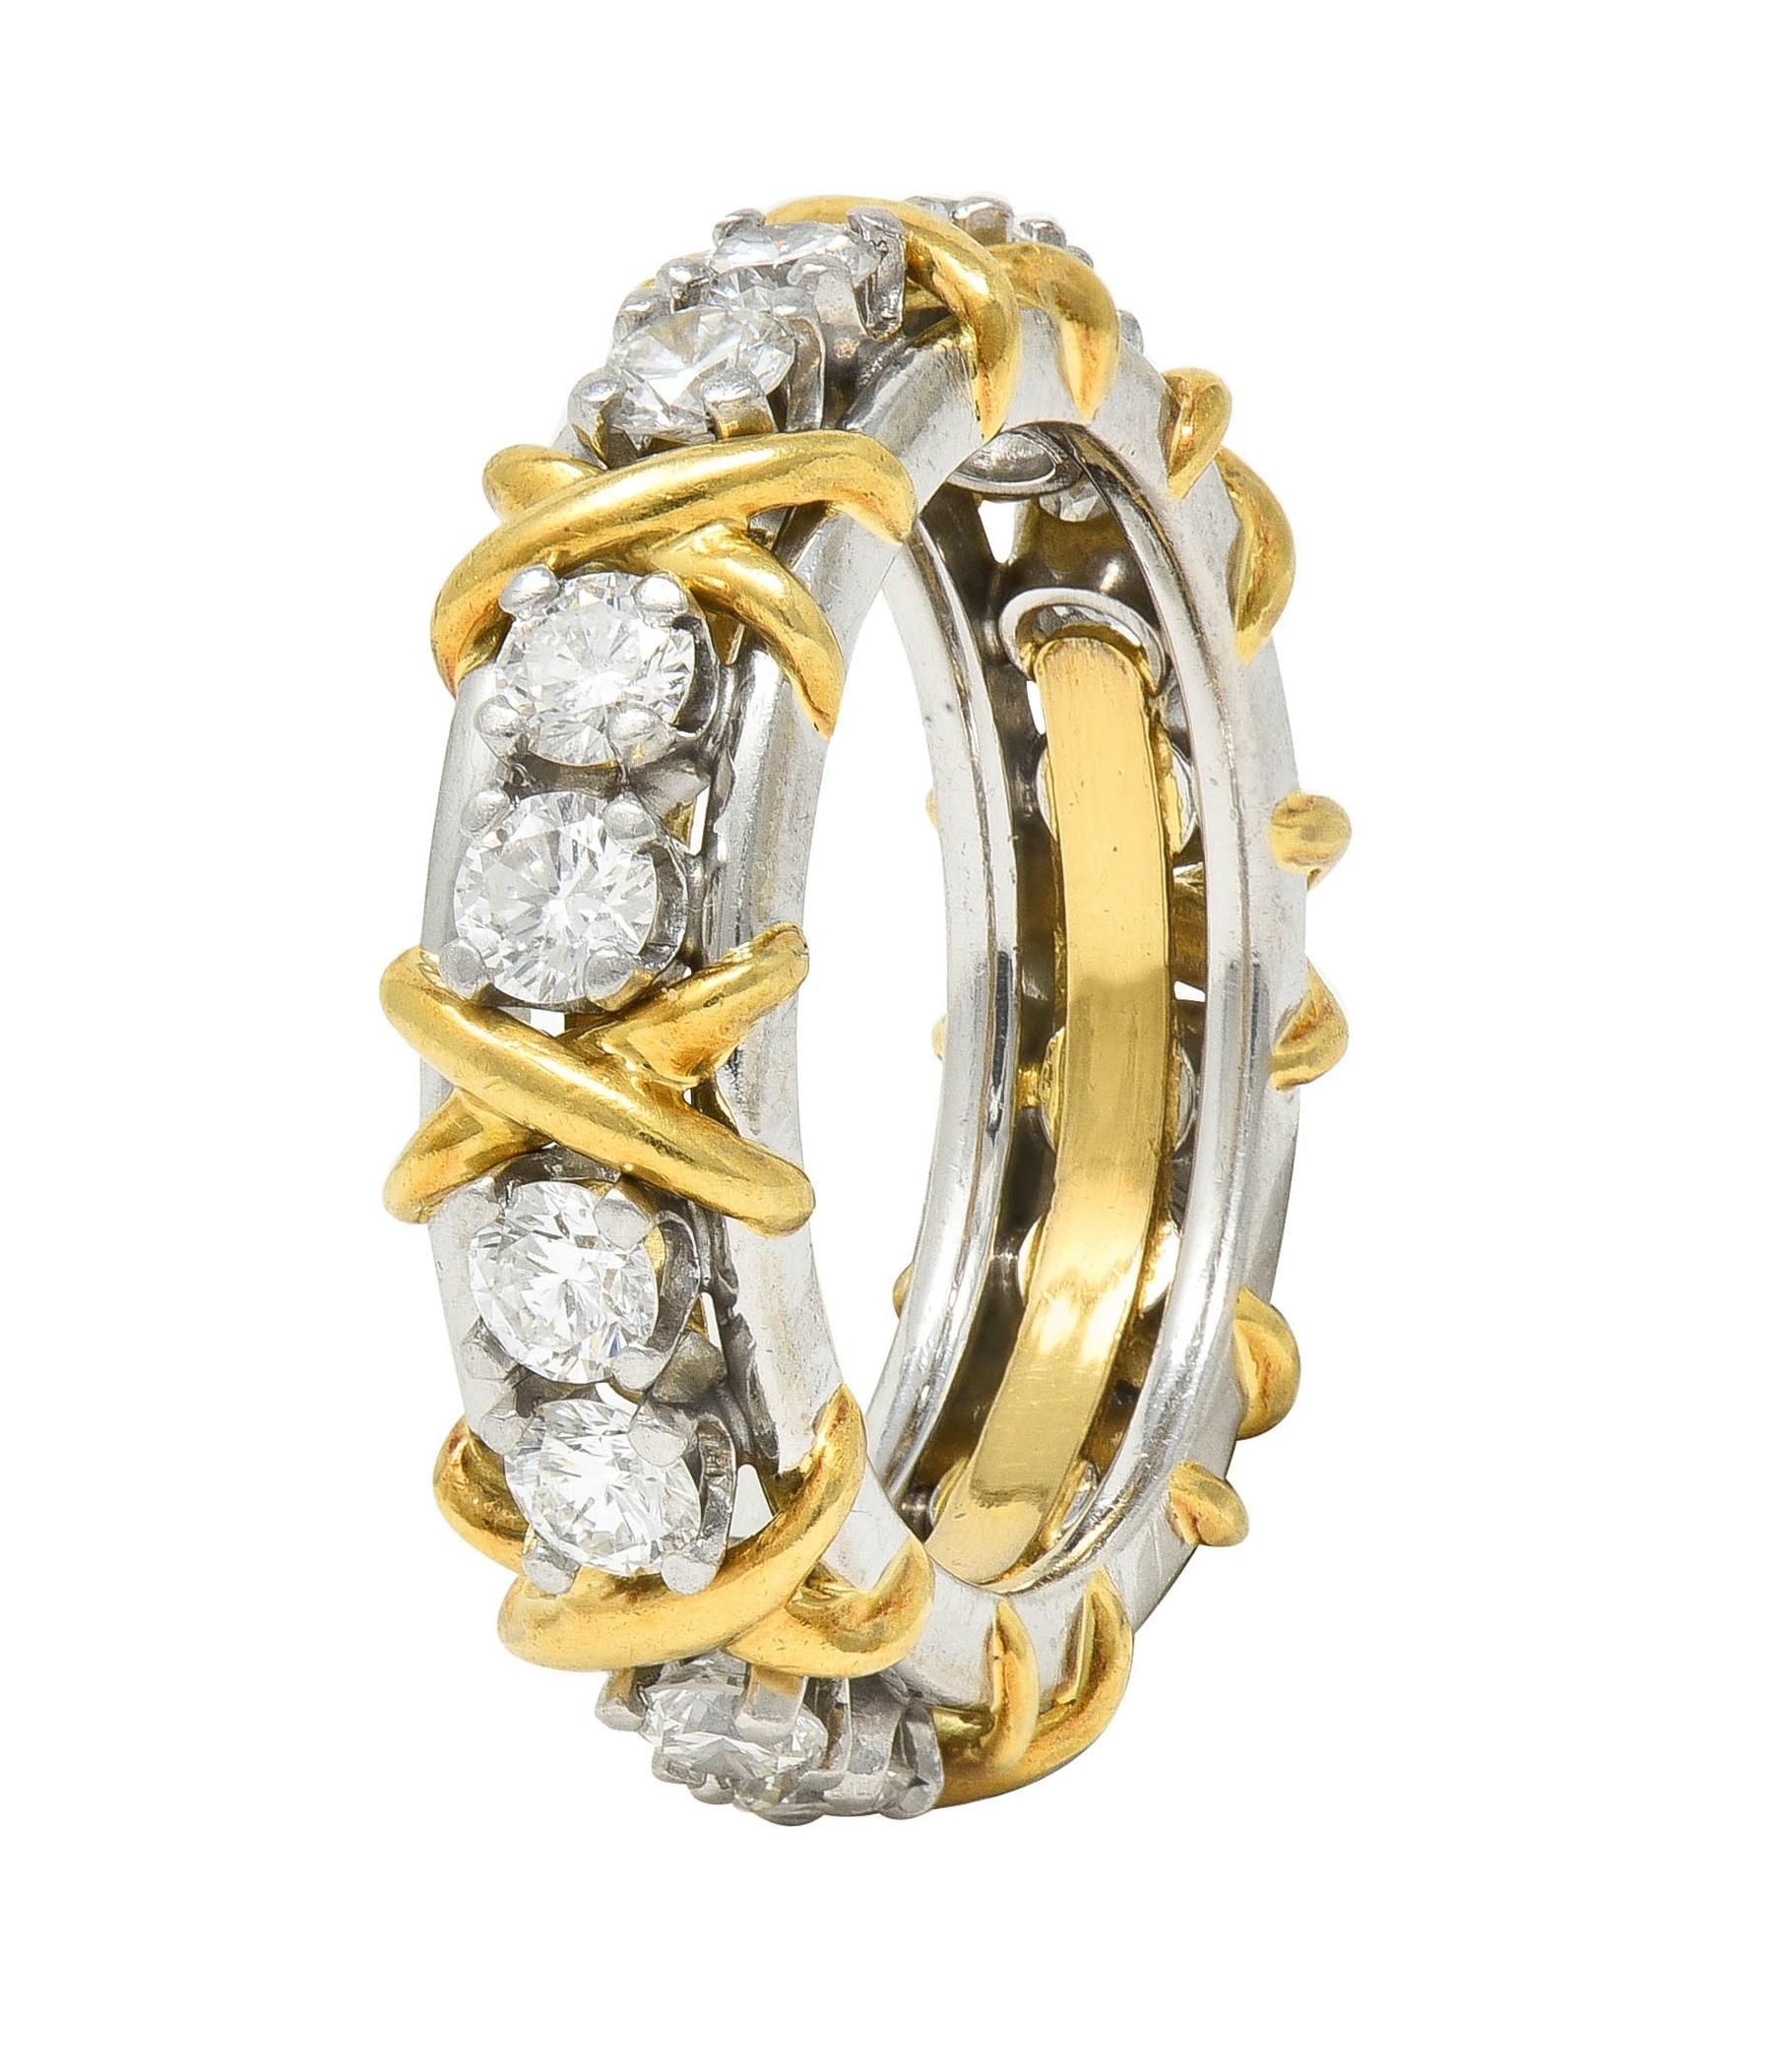 Designed as a platinum band with yellow gold 